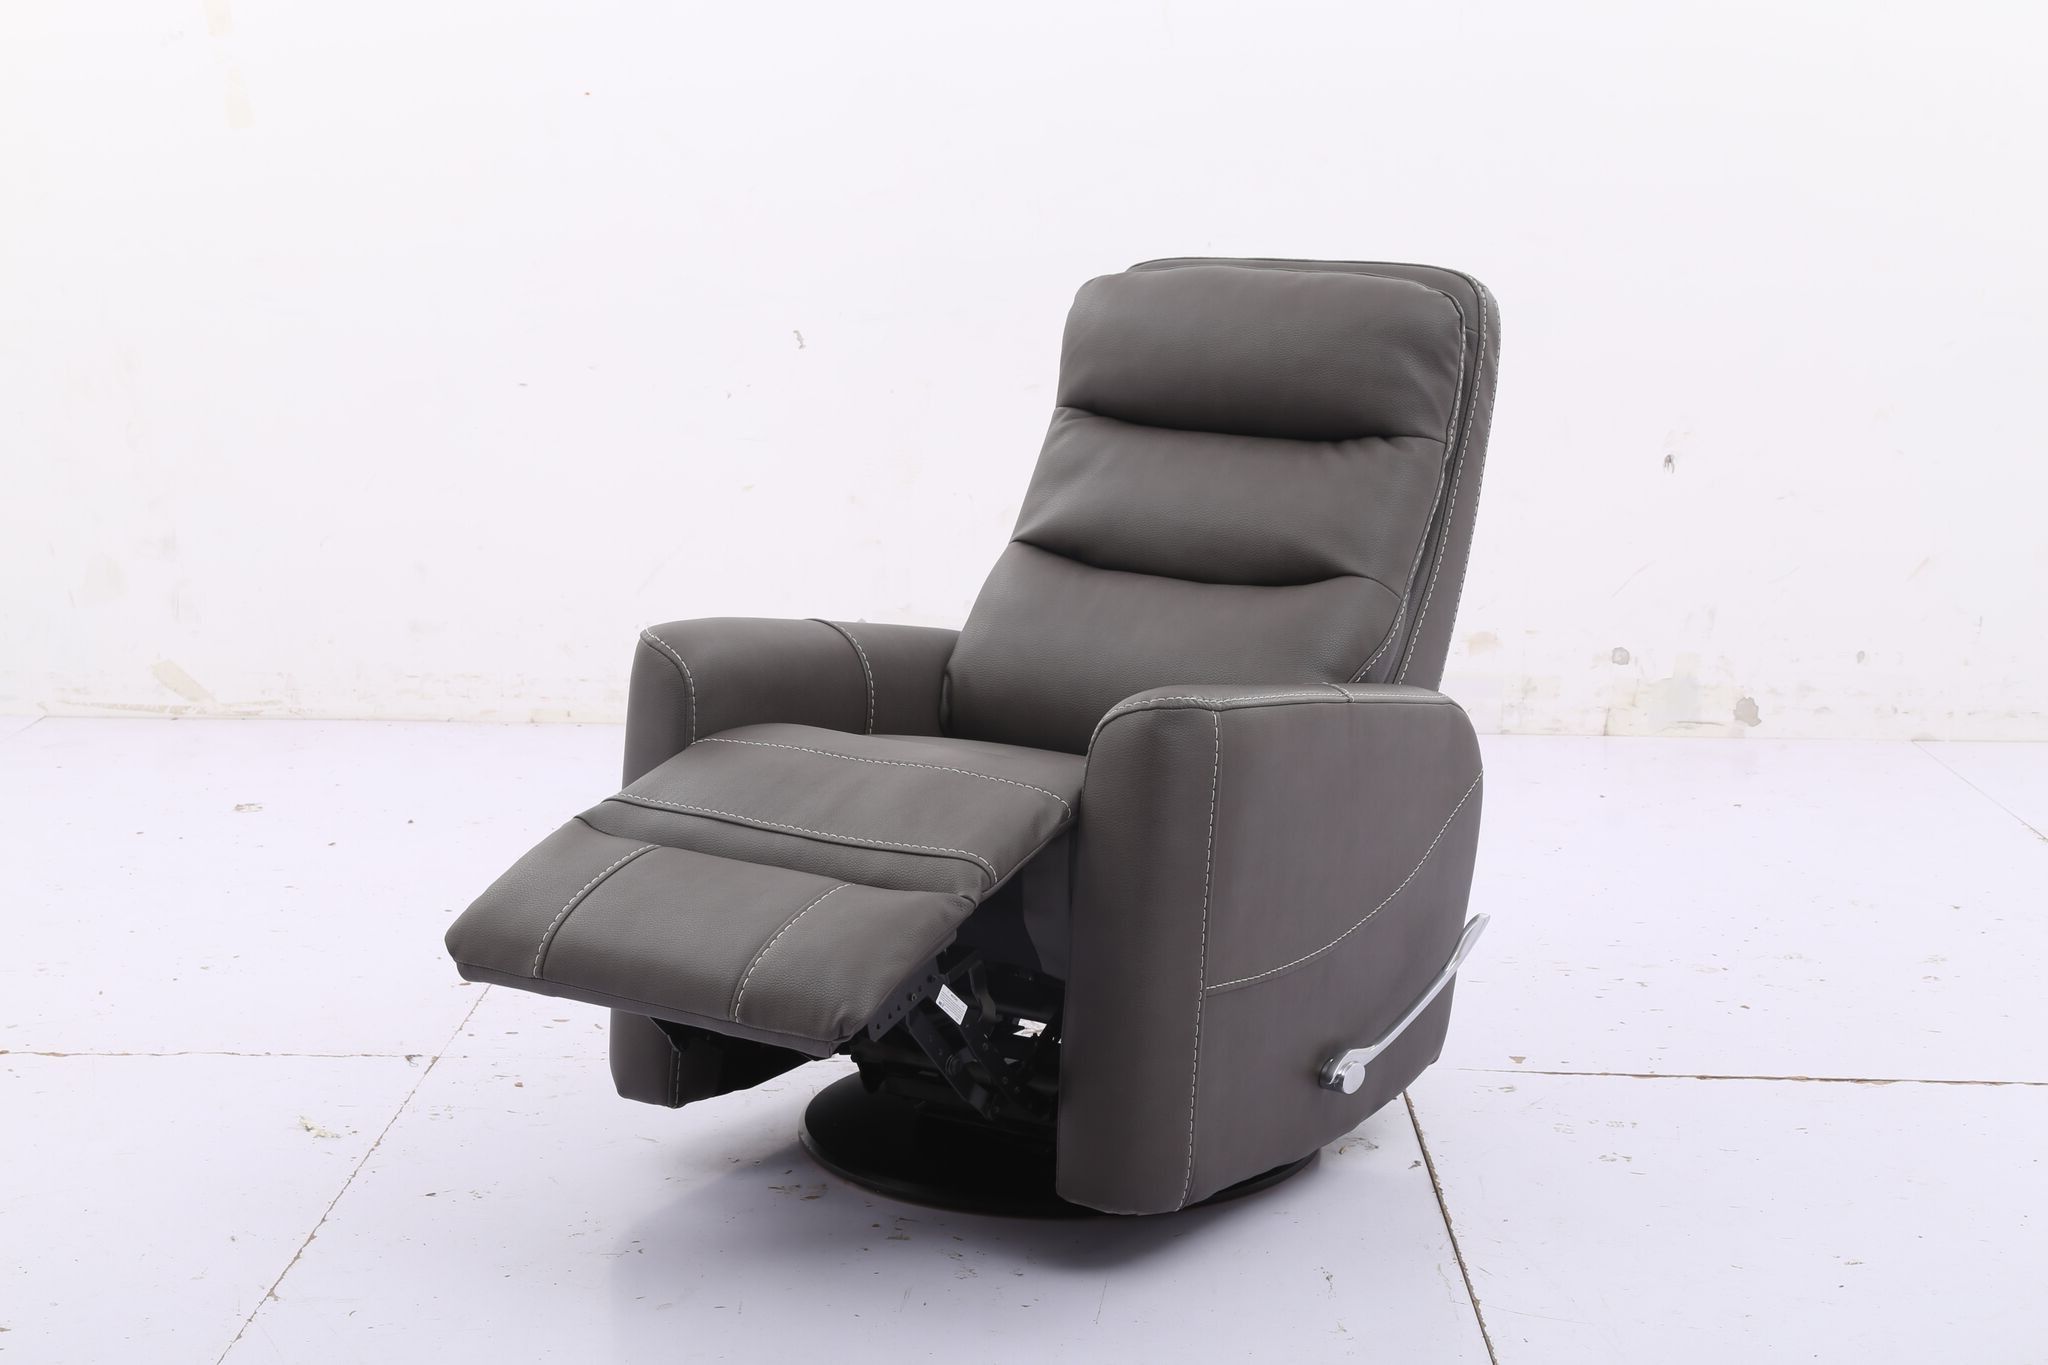 Hercules Chocolate Swivel Glider Recliners In Most Up To Date Hercules  Haze  Swivel Glider Recliner With Articulating Headrest (View 7 of 20)